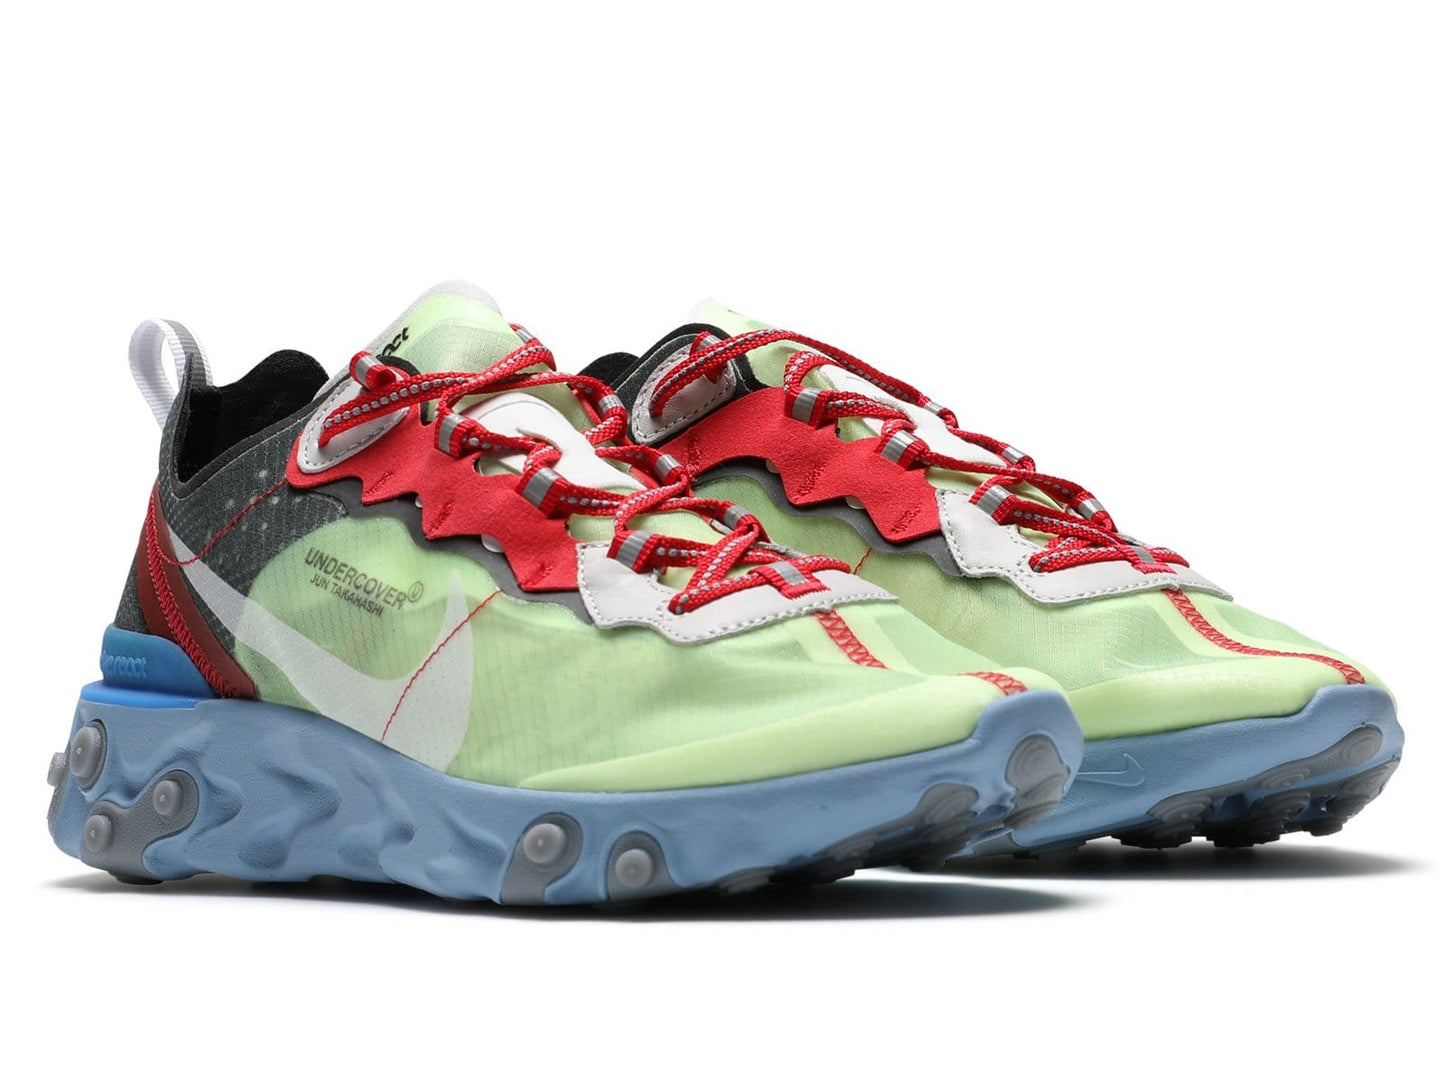 Nike Shoes REACT ELEMENT 87 / UNDERCOVER